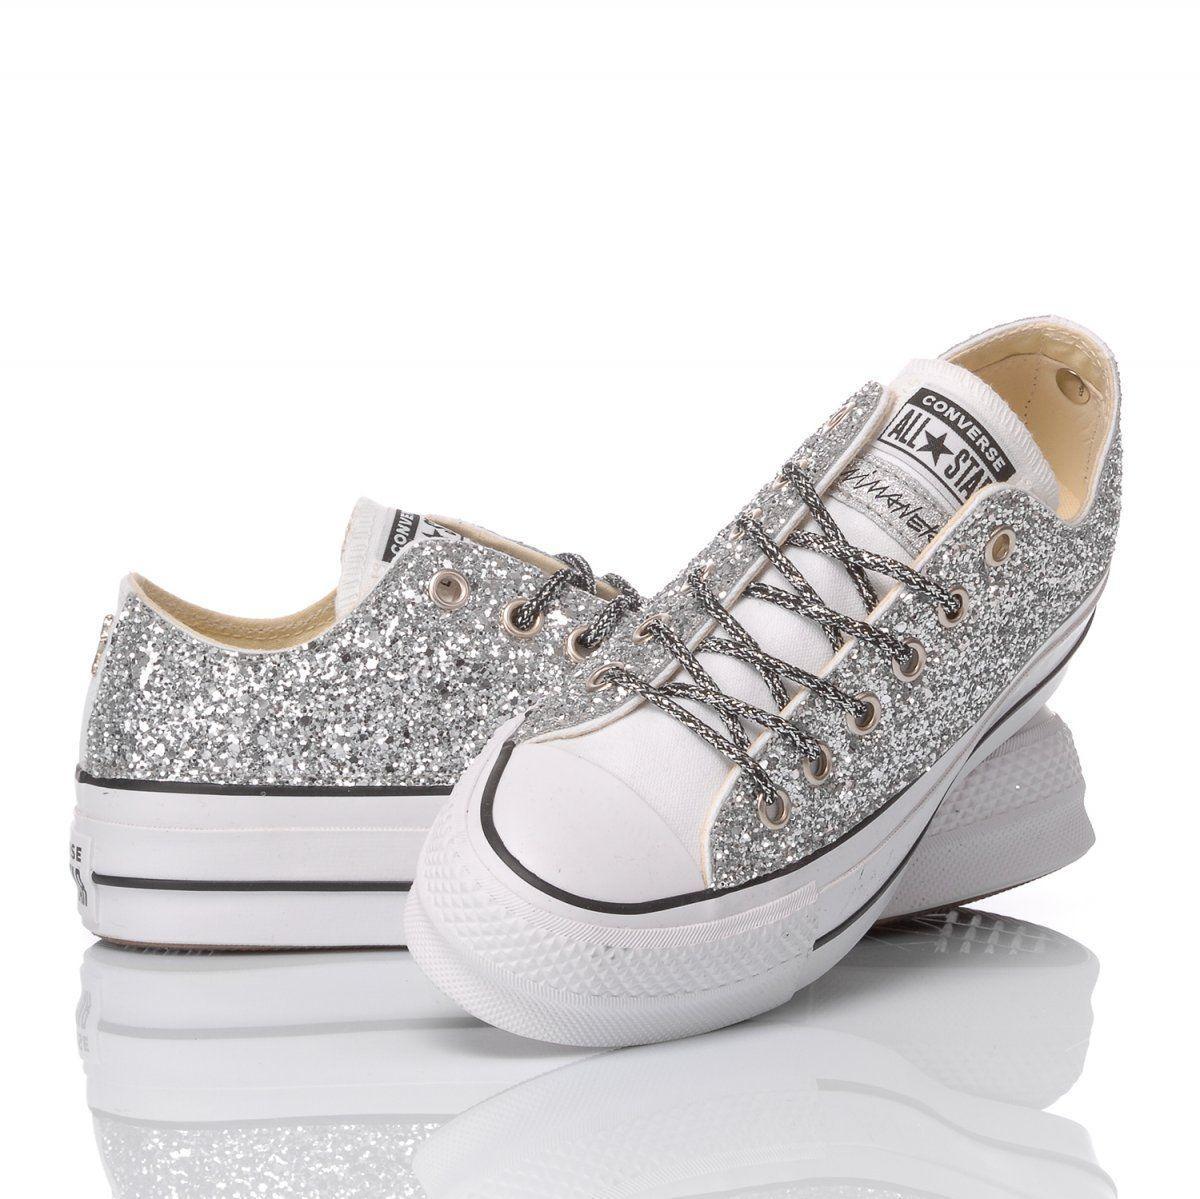 converse silver sneakers